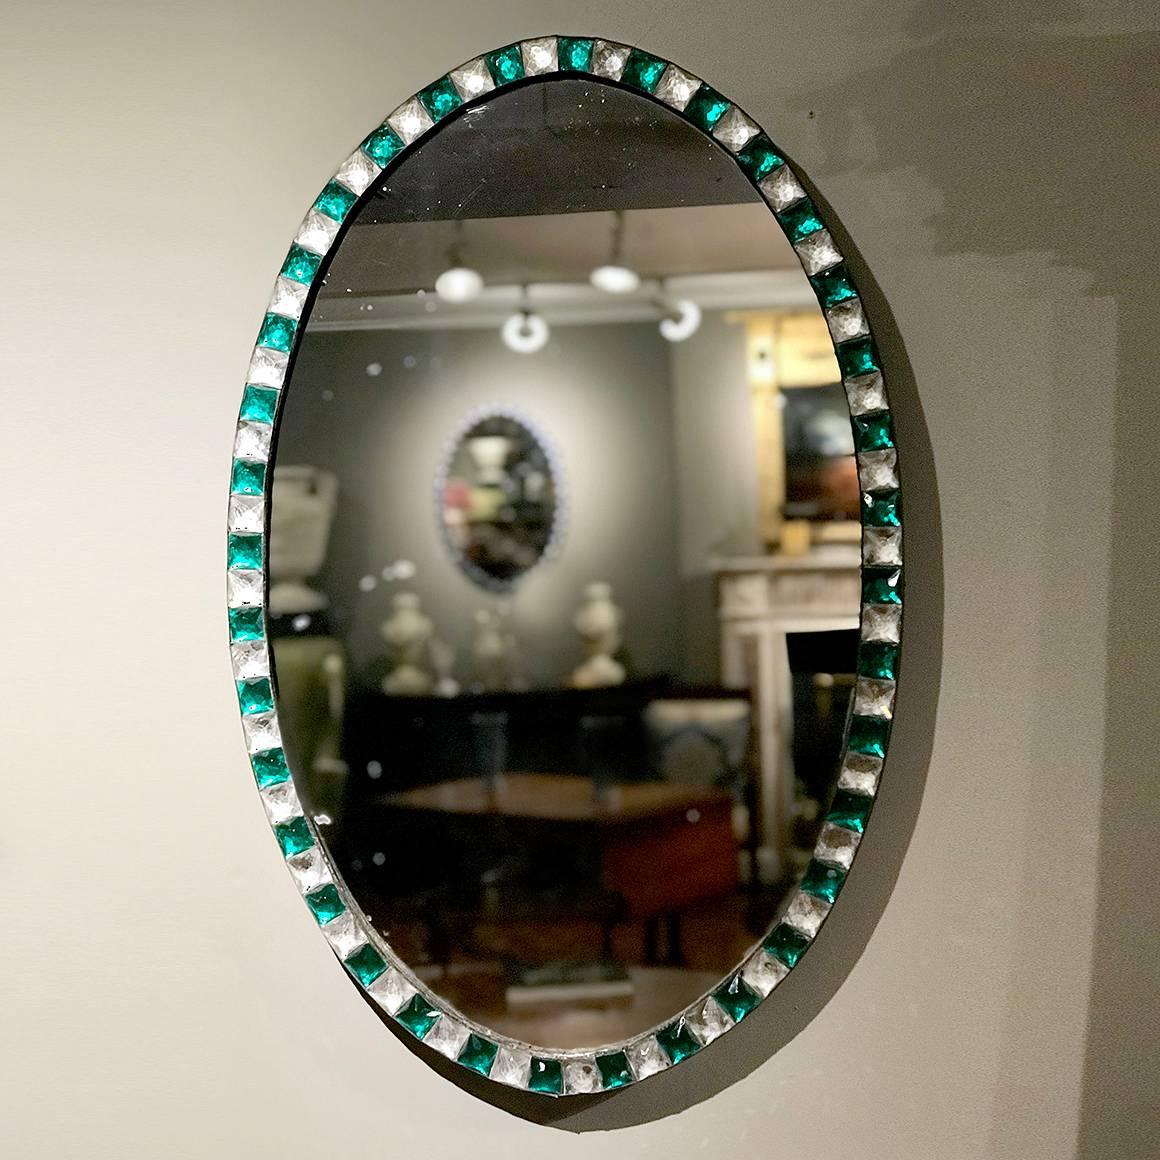 This distinctive Irish Georgian oval mirror is set apart by its unusual alternating green and clear faceted cut glass gems, set into a metal oval frame.